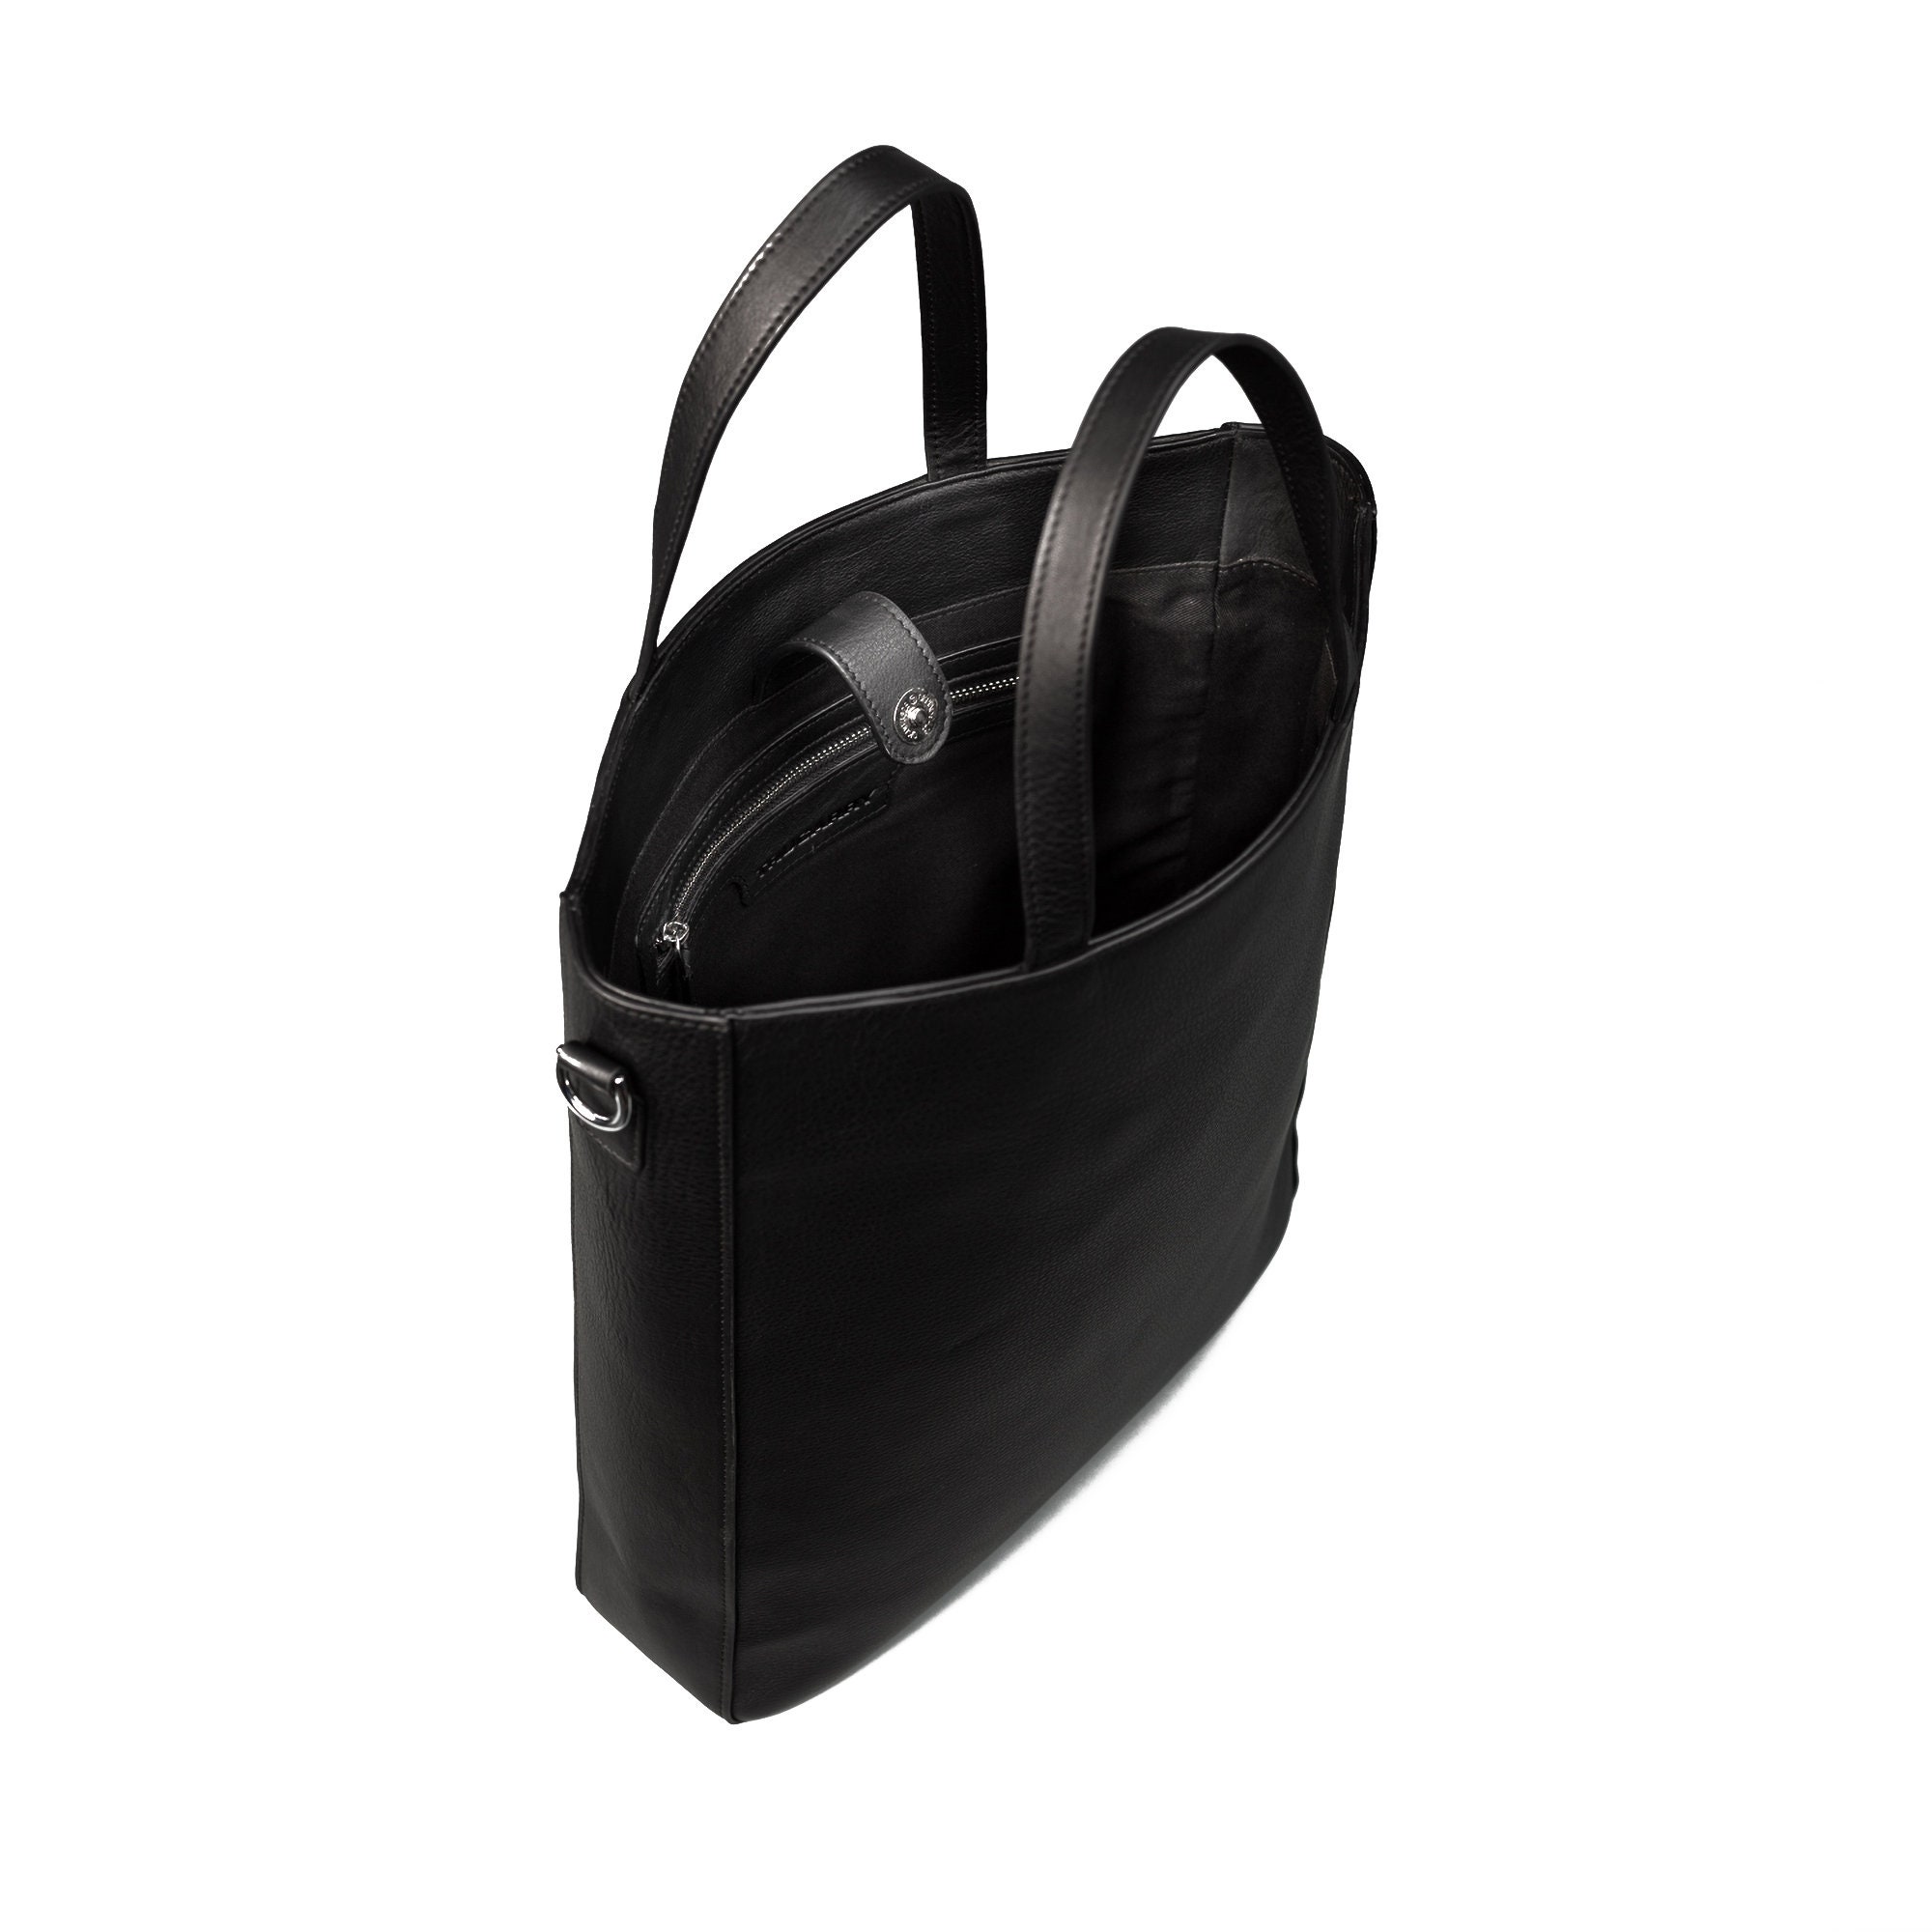 The Poet Black Leather Tote Bag